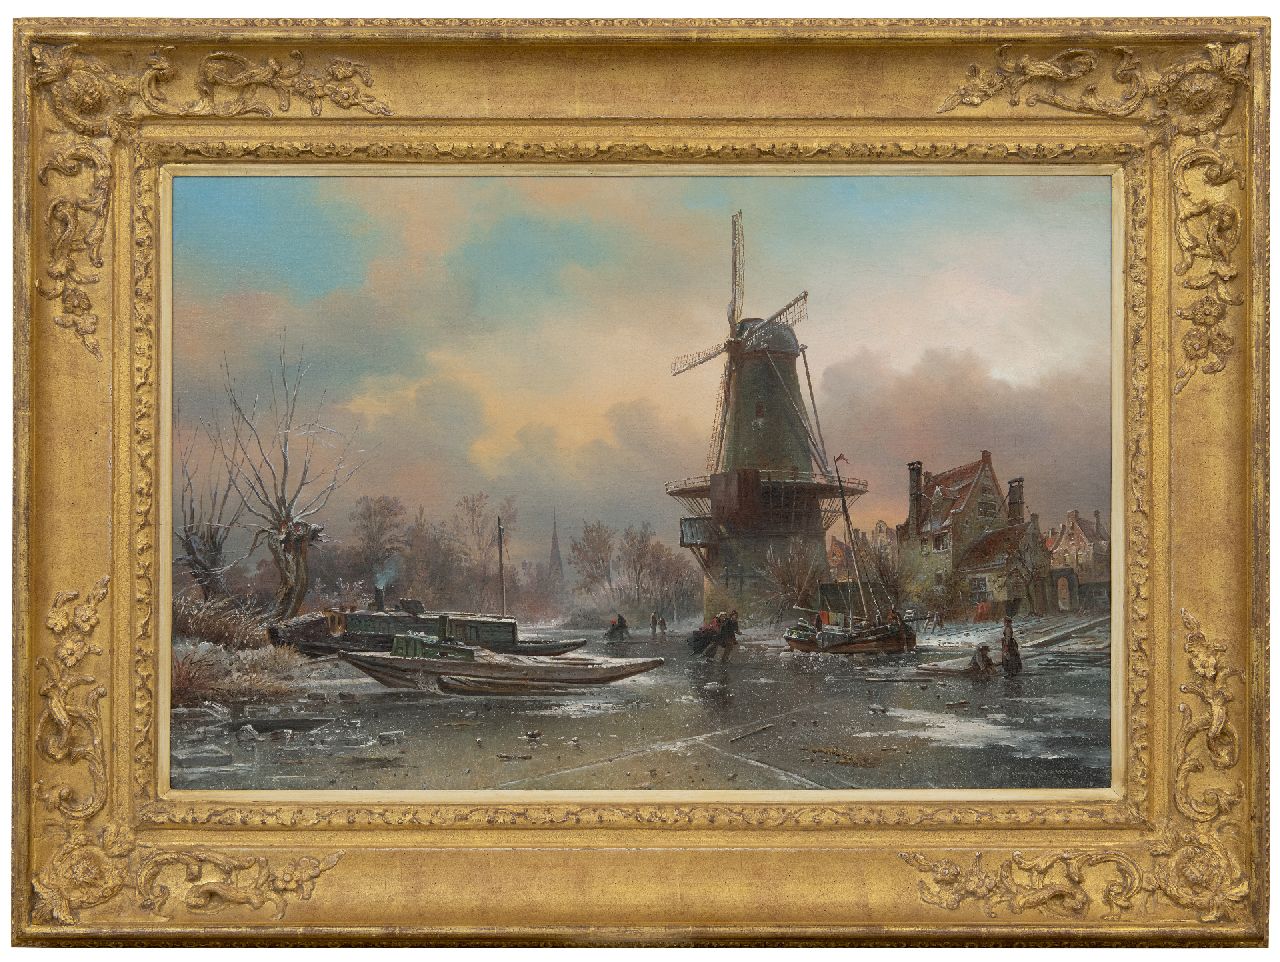 Bommel E.P. van | Elias Pieter van Bommel | Paintings offered for sale | Skaters on a frozen canal near a windmill, oil on canvas 50.1 x 76.1 cm, signed l.r. and dated 1870